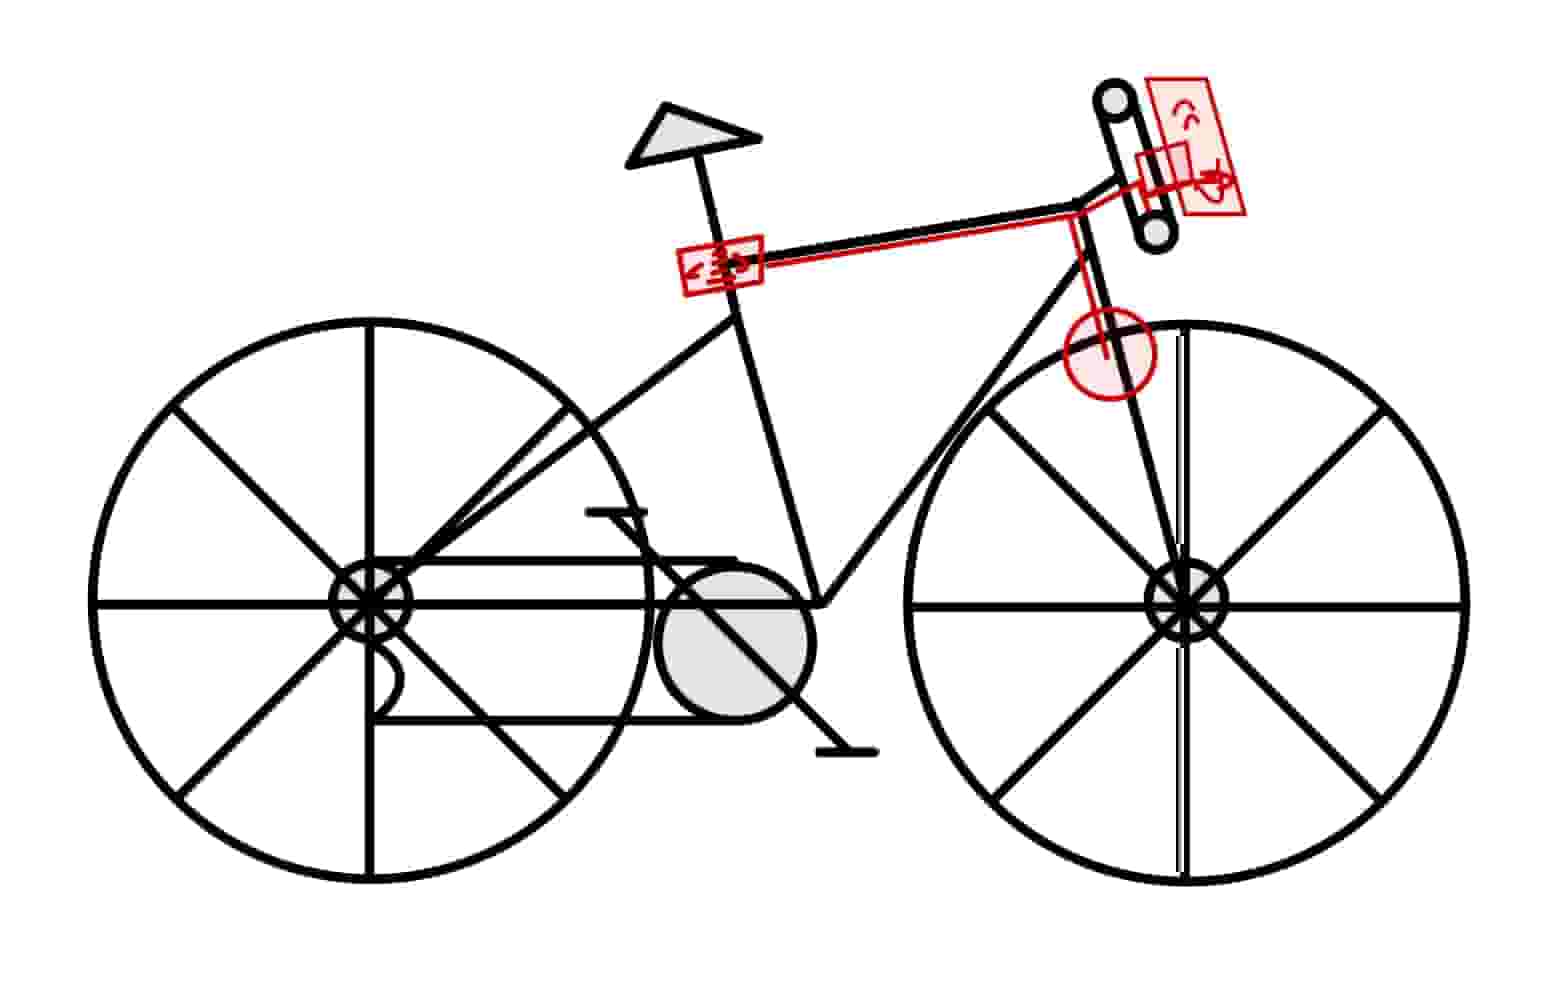 A bad drawing of a bike with the signal turner